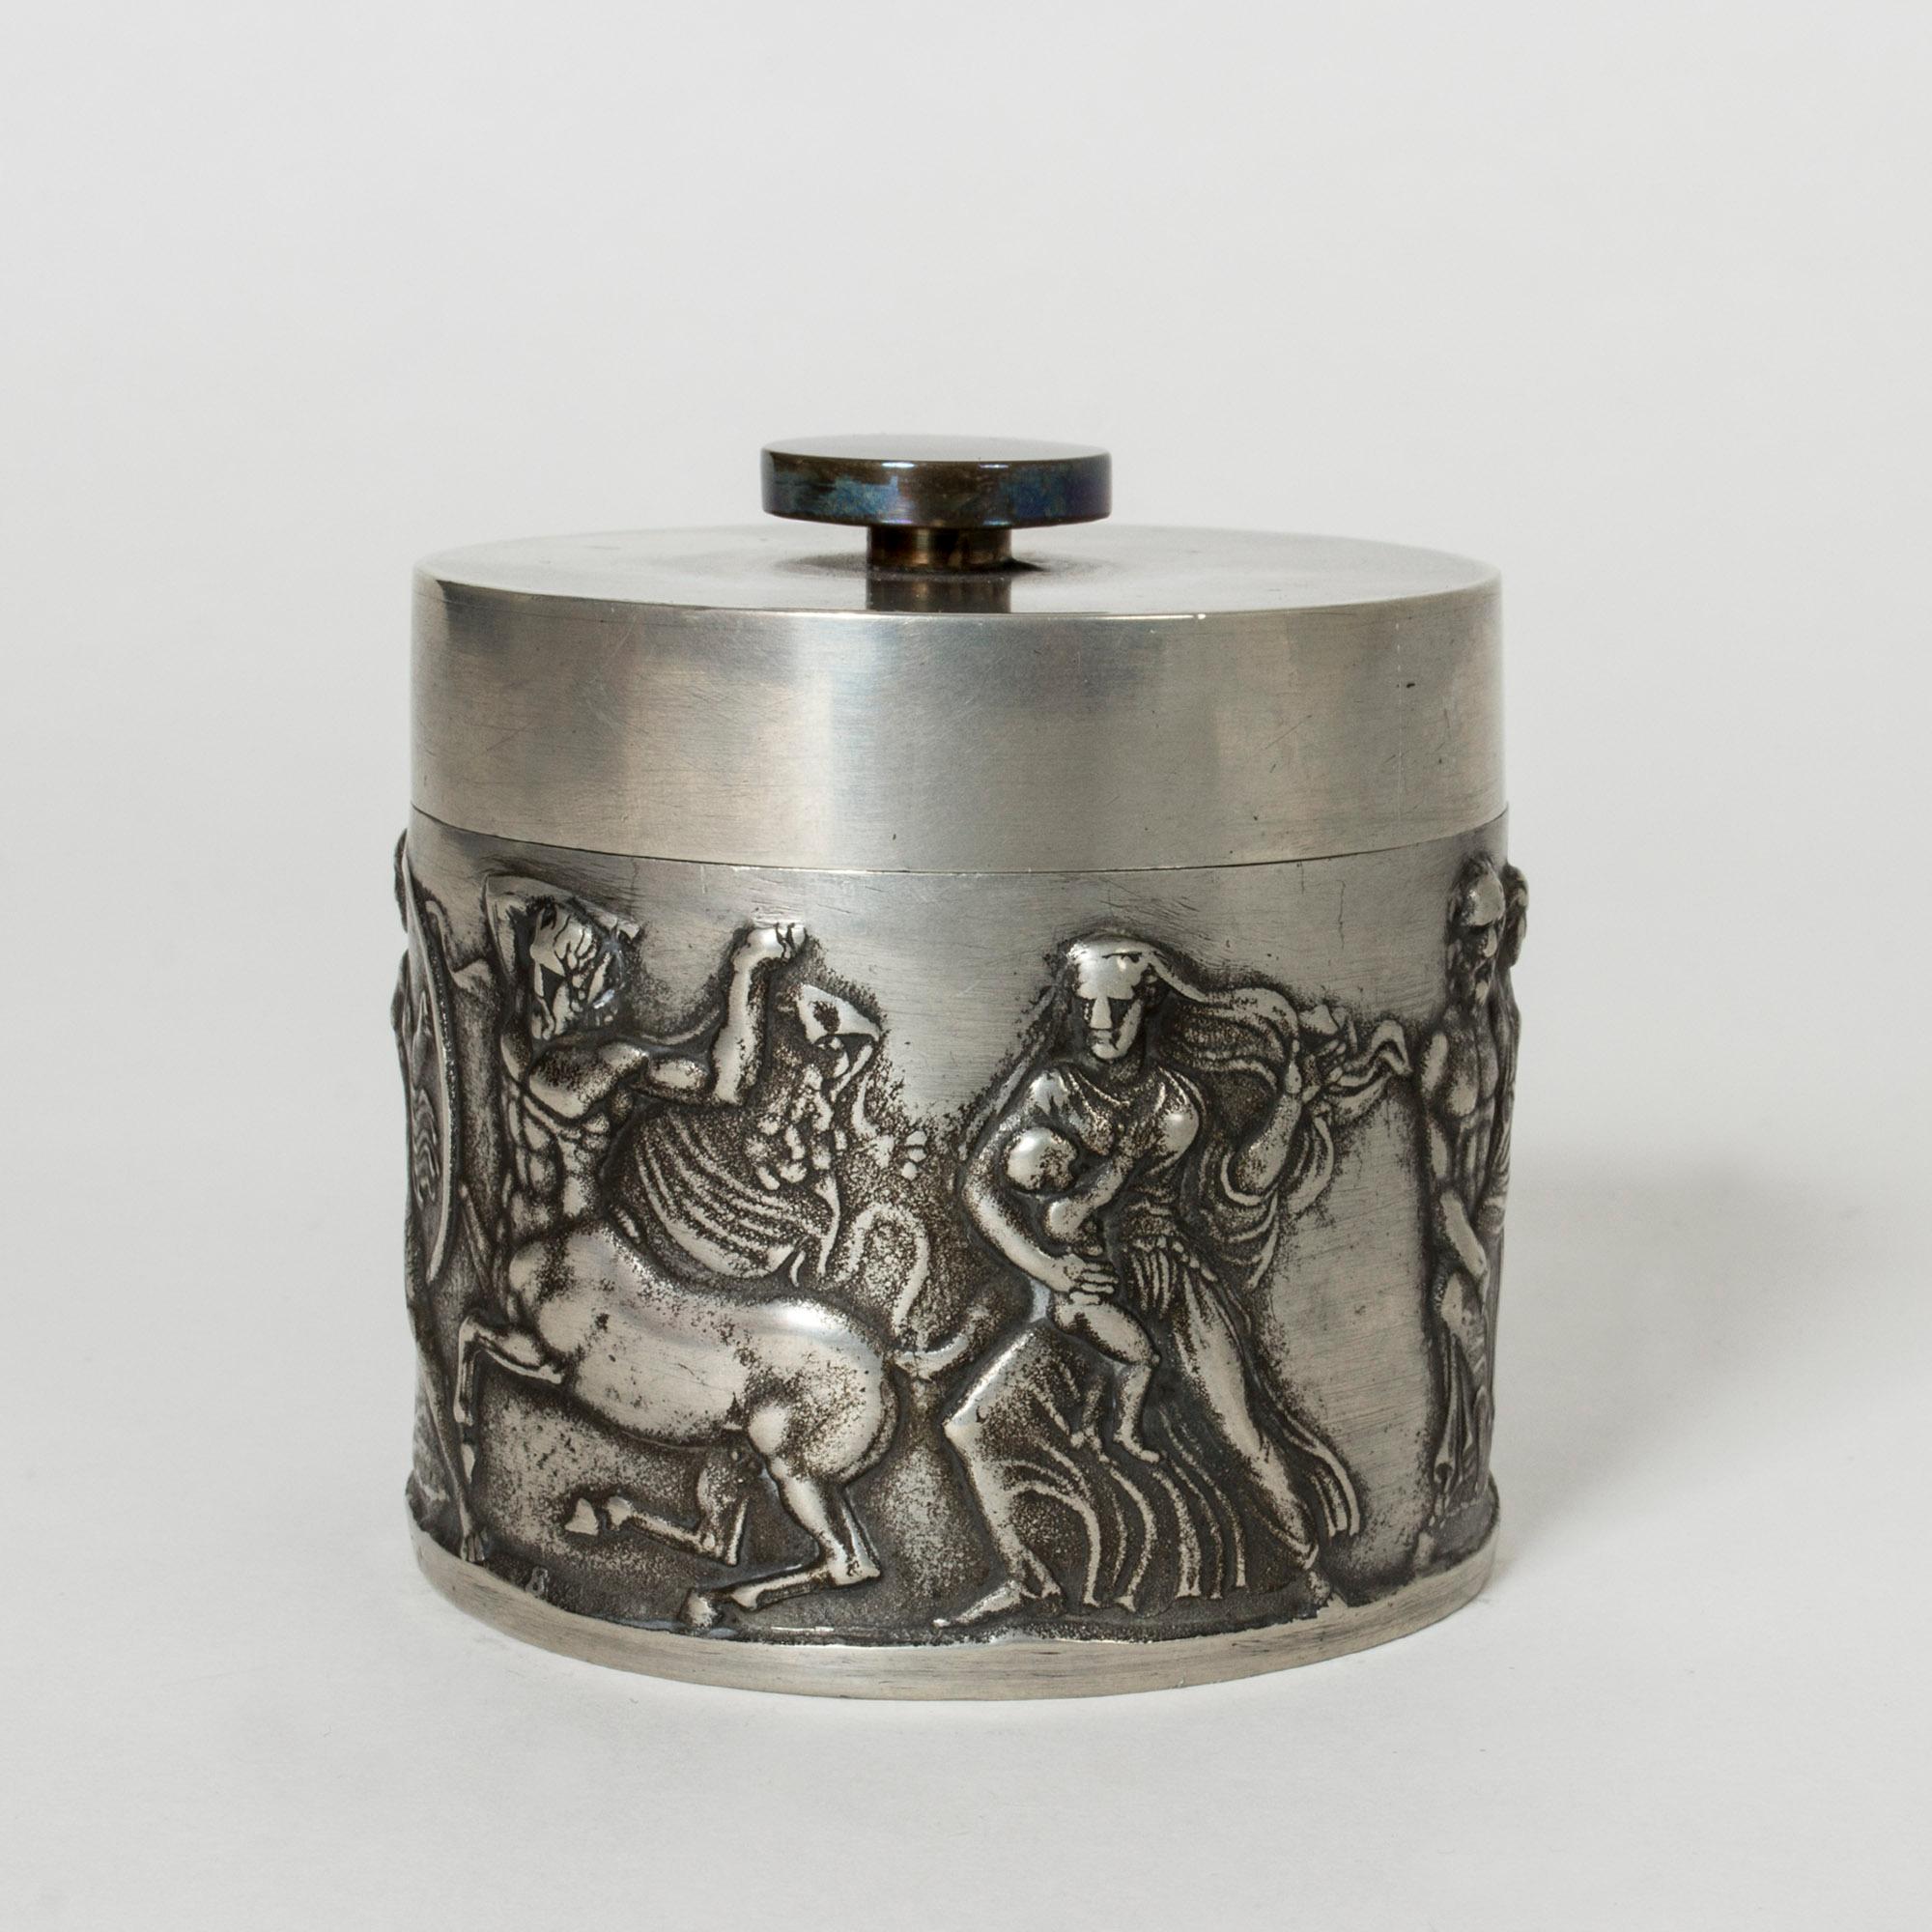 Pewter jar with brass knob. Designed by Herman Bergman, who was the founder of Herman Bergman’s Fine Art Foundry, purveyor to the Royal Court. A dramatic scene with centaurs, a warrior and a woman with a baby is depicted on the body of the jar.